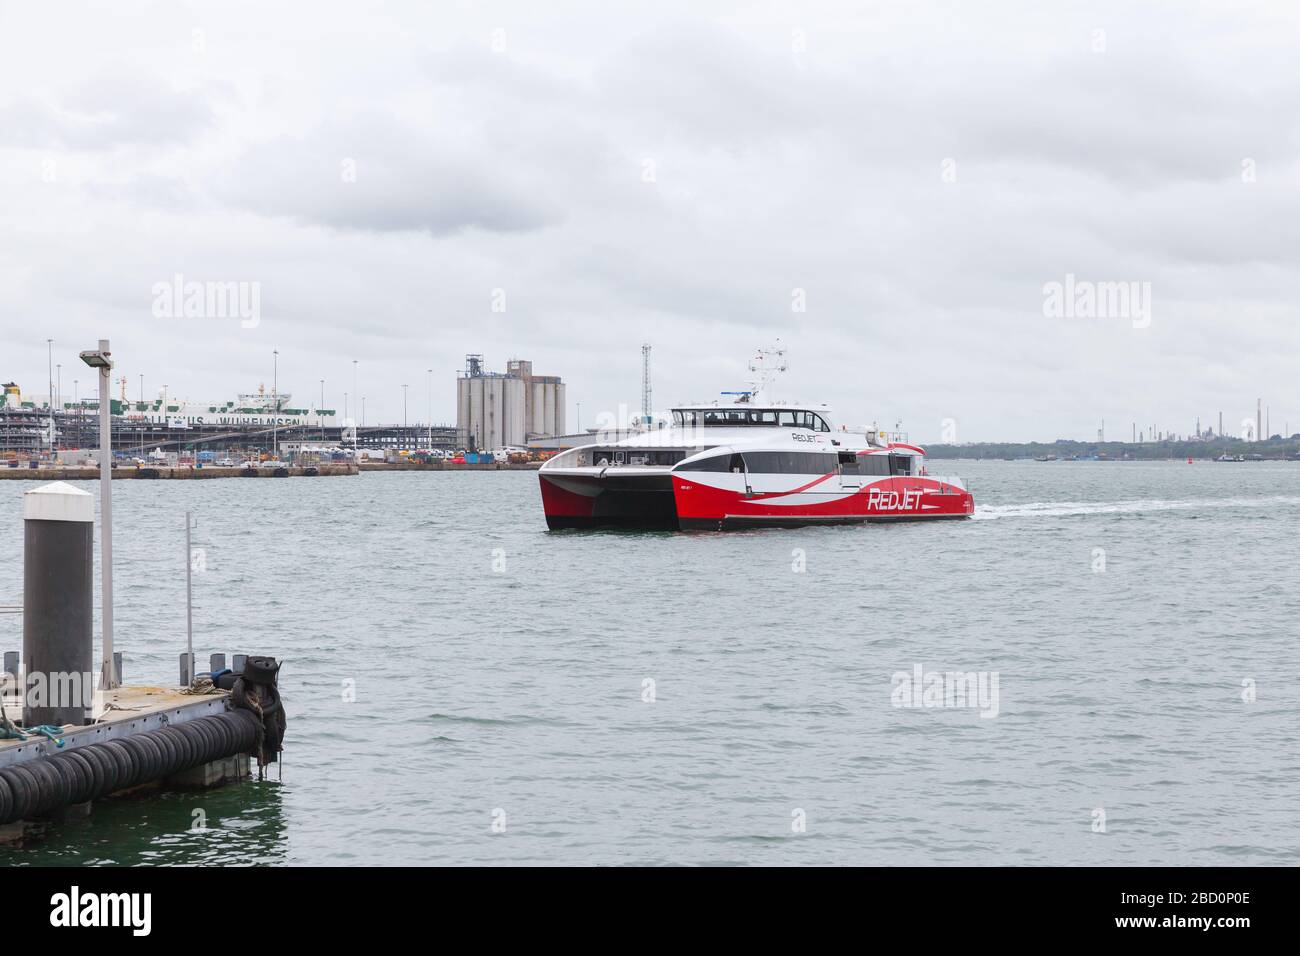 Southampton, United Kingdom - April 24, 2019: Fast passenger ferry arrives the port of Southampton. MV Red Jet 7 is a high-speed Catamaran ferry of Re Stock Photo